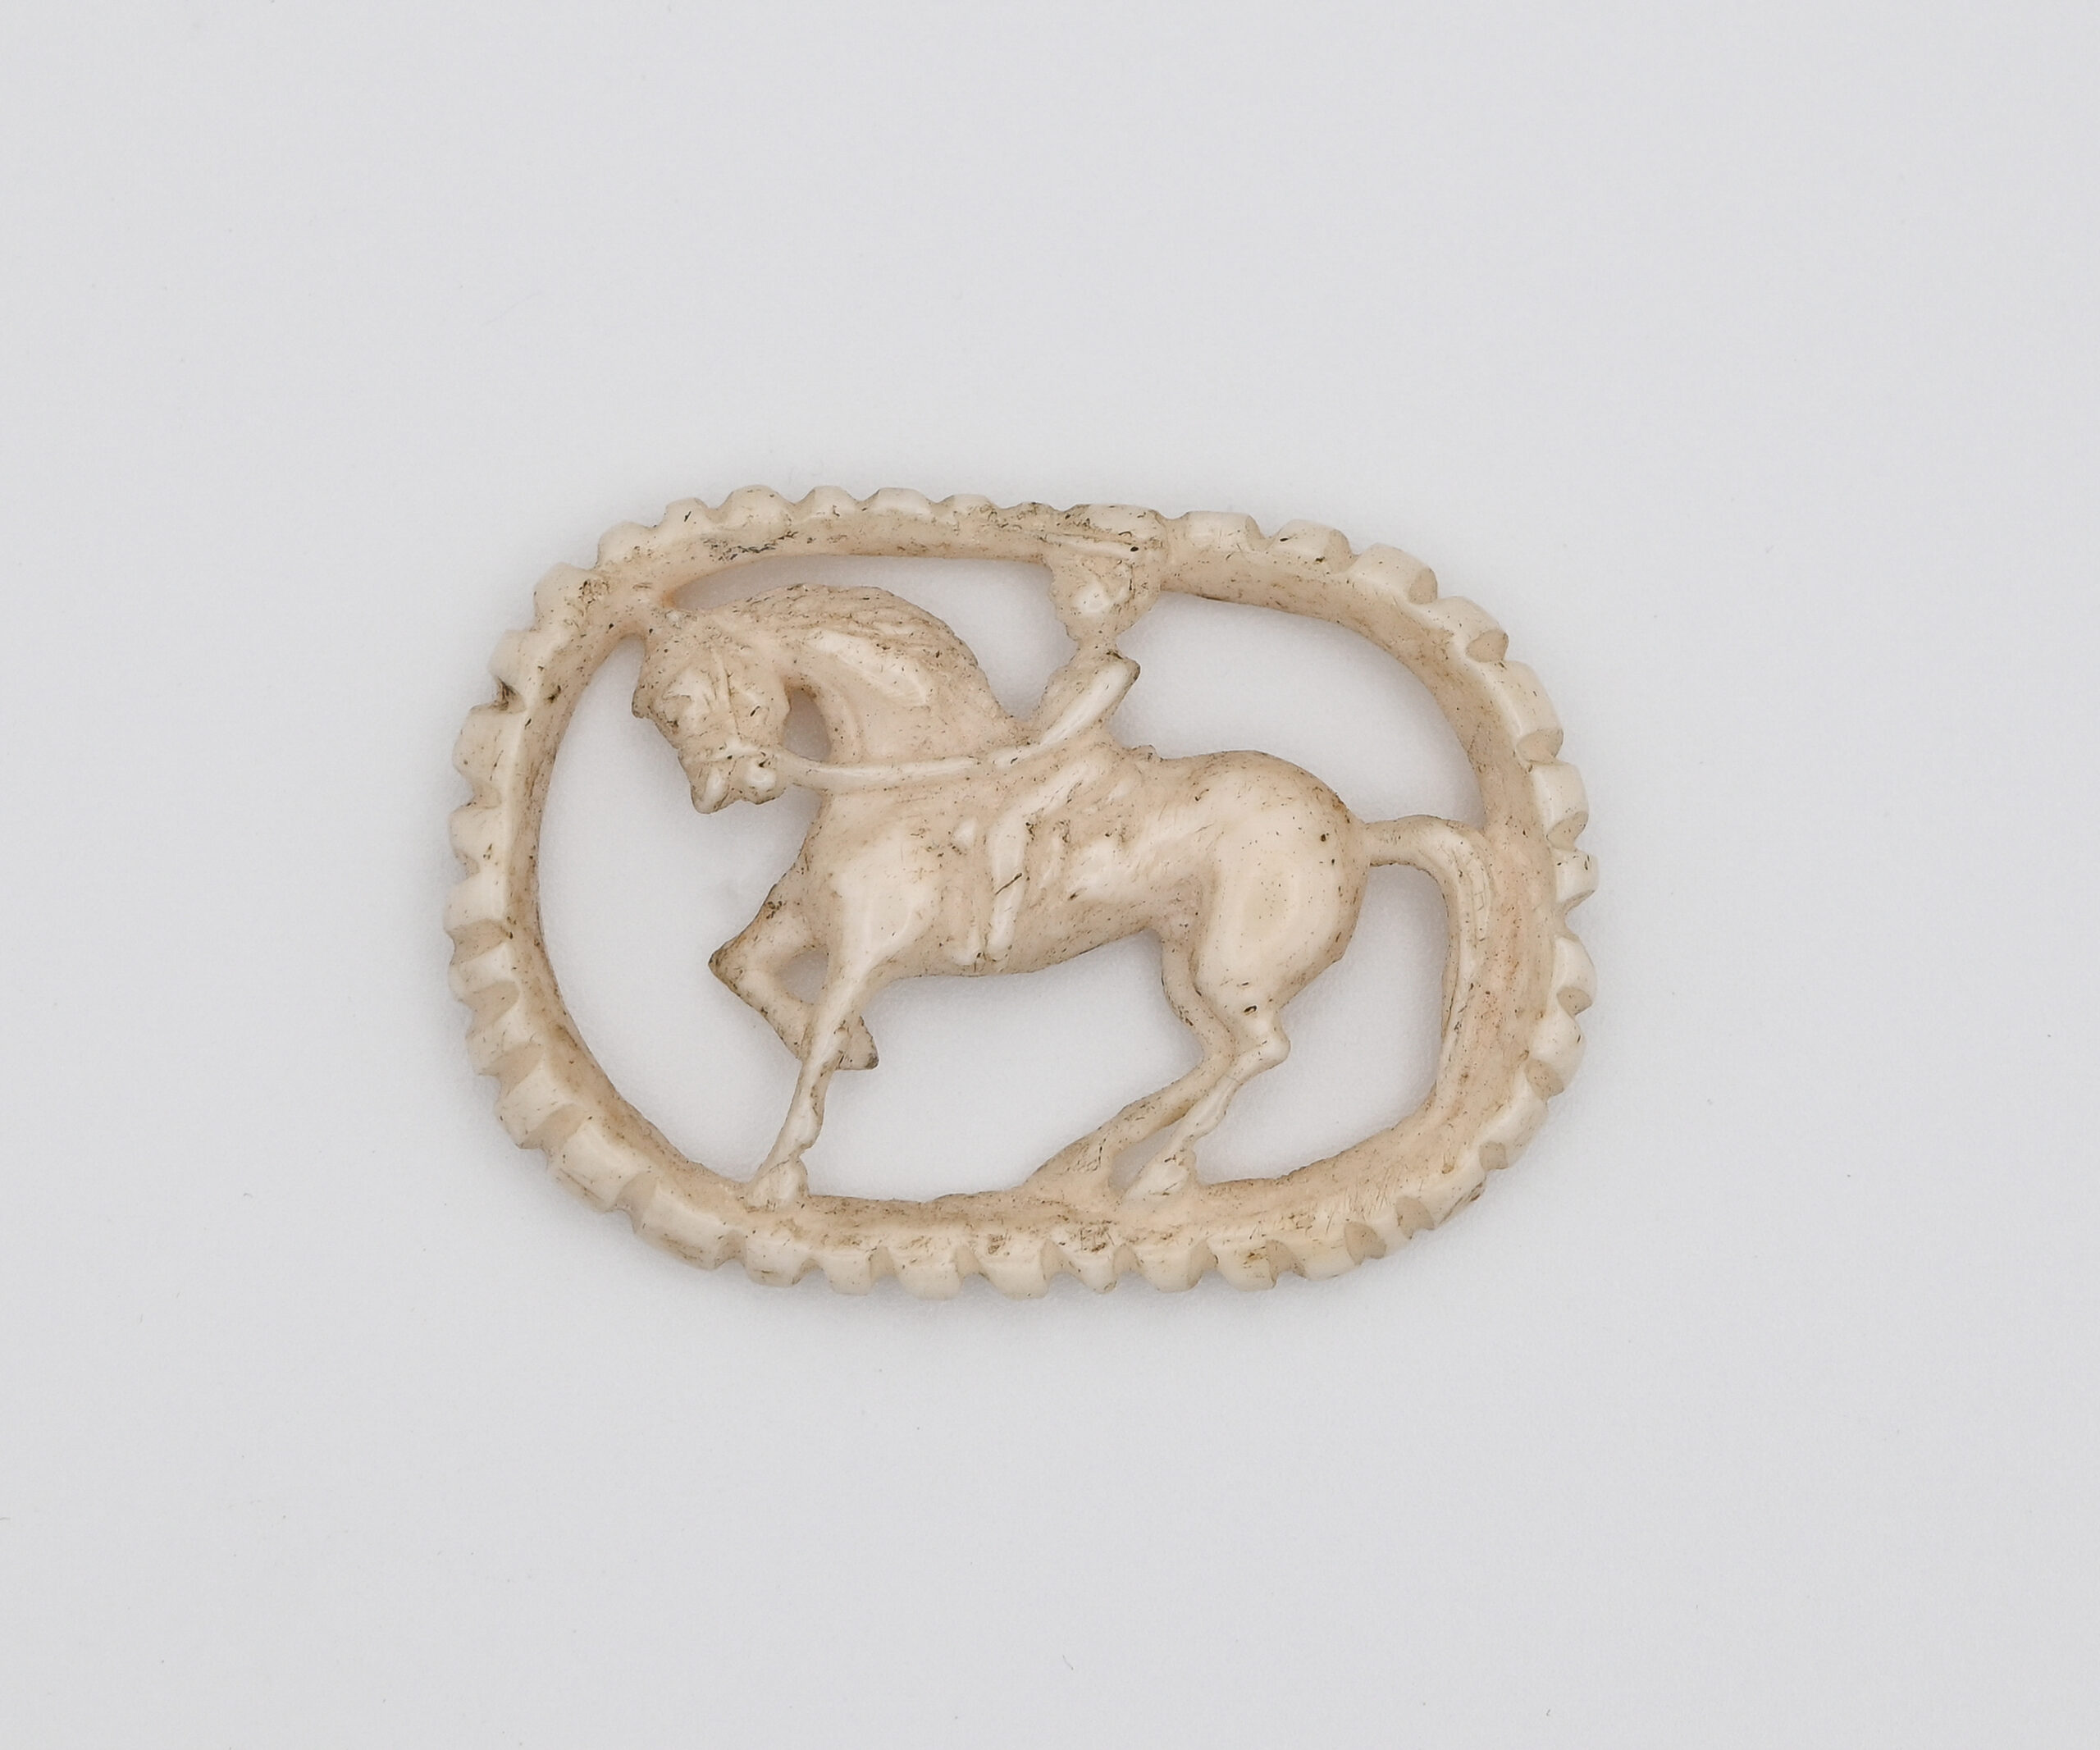 bone carved into the shape of a figure riding a horse with an oval border